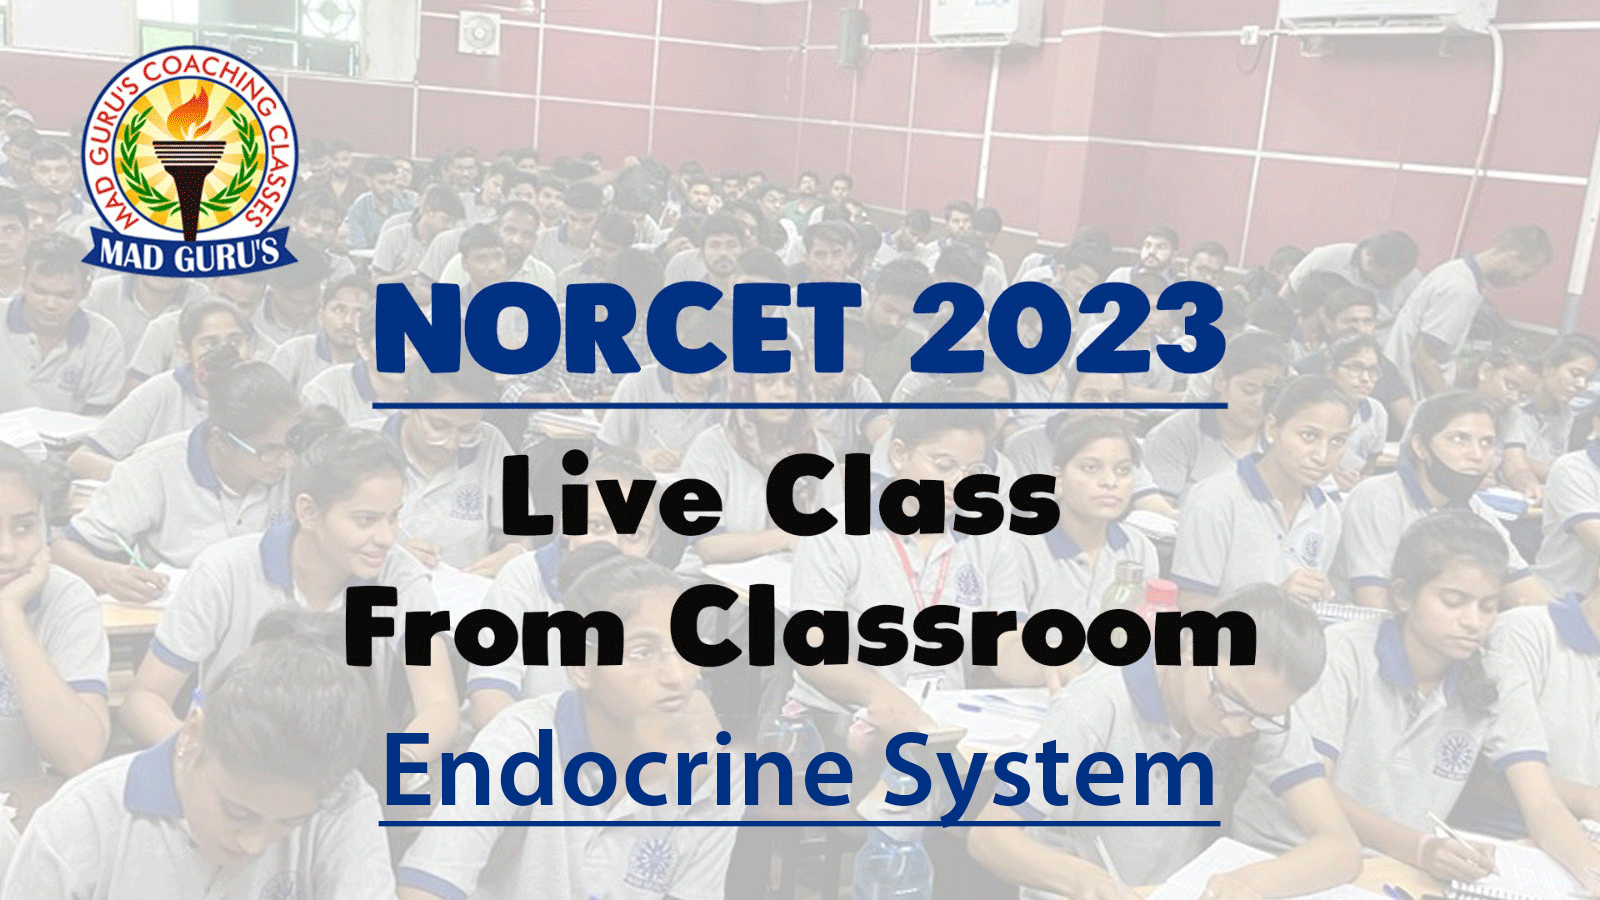 Endocrine System Classes || Norcet classes from classroom